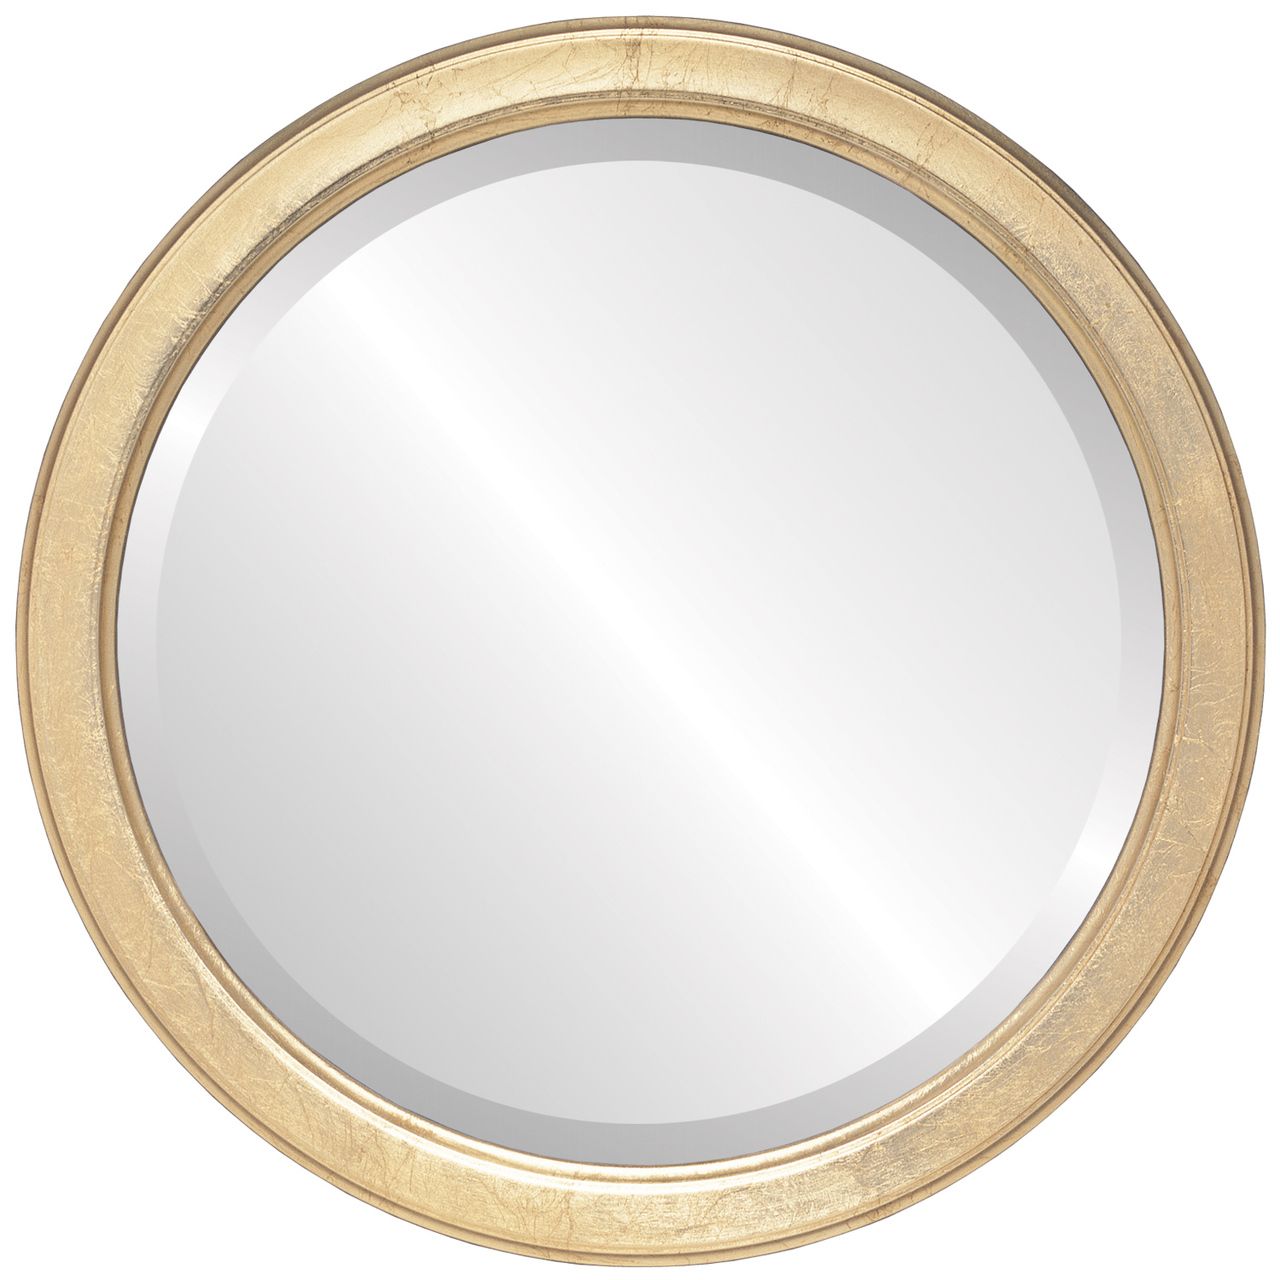 Contemporary Gold Round Mirrors From $114 | Free Shipping With Gold Rounded Edge Mirrors (View 1 of 15)